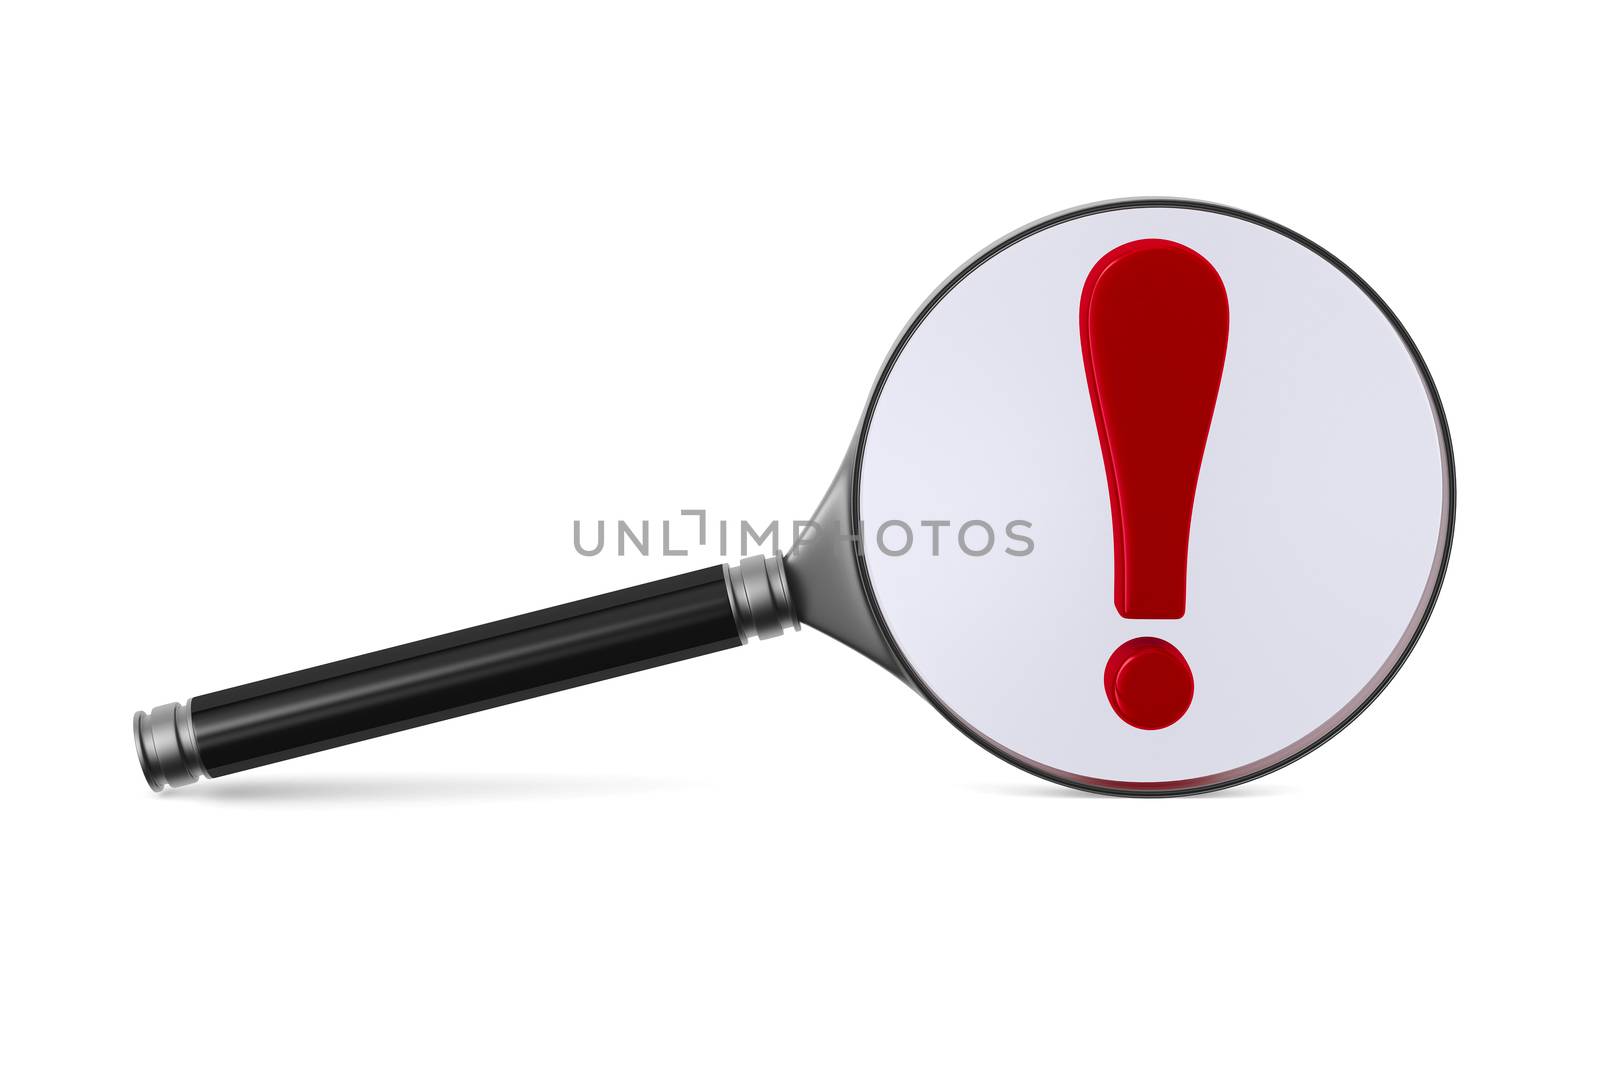 Magnifier and exclamation sign on white background. Isolated 3D image